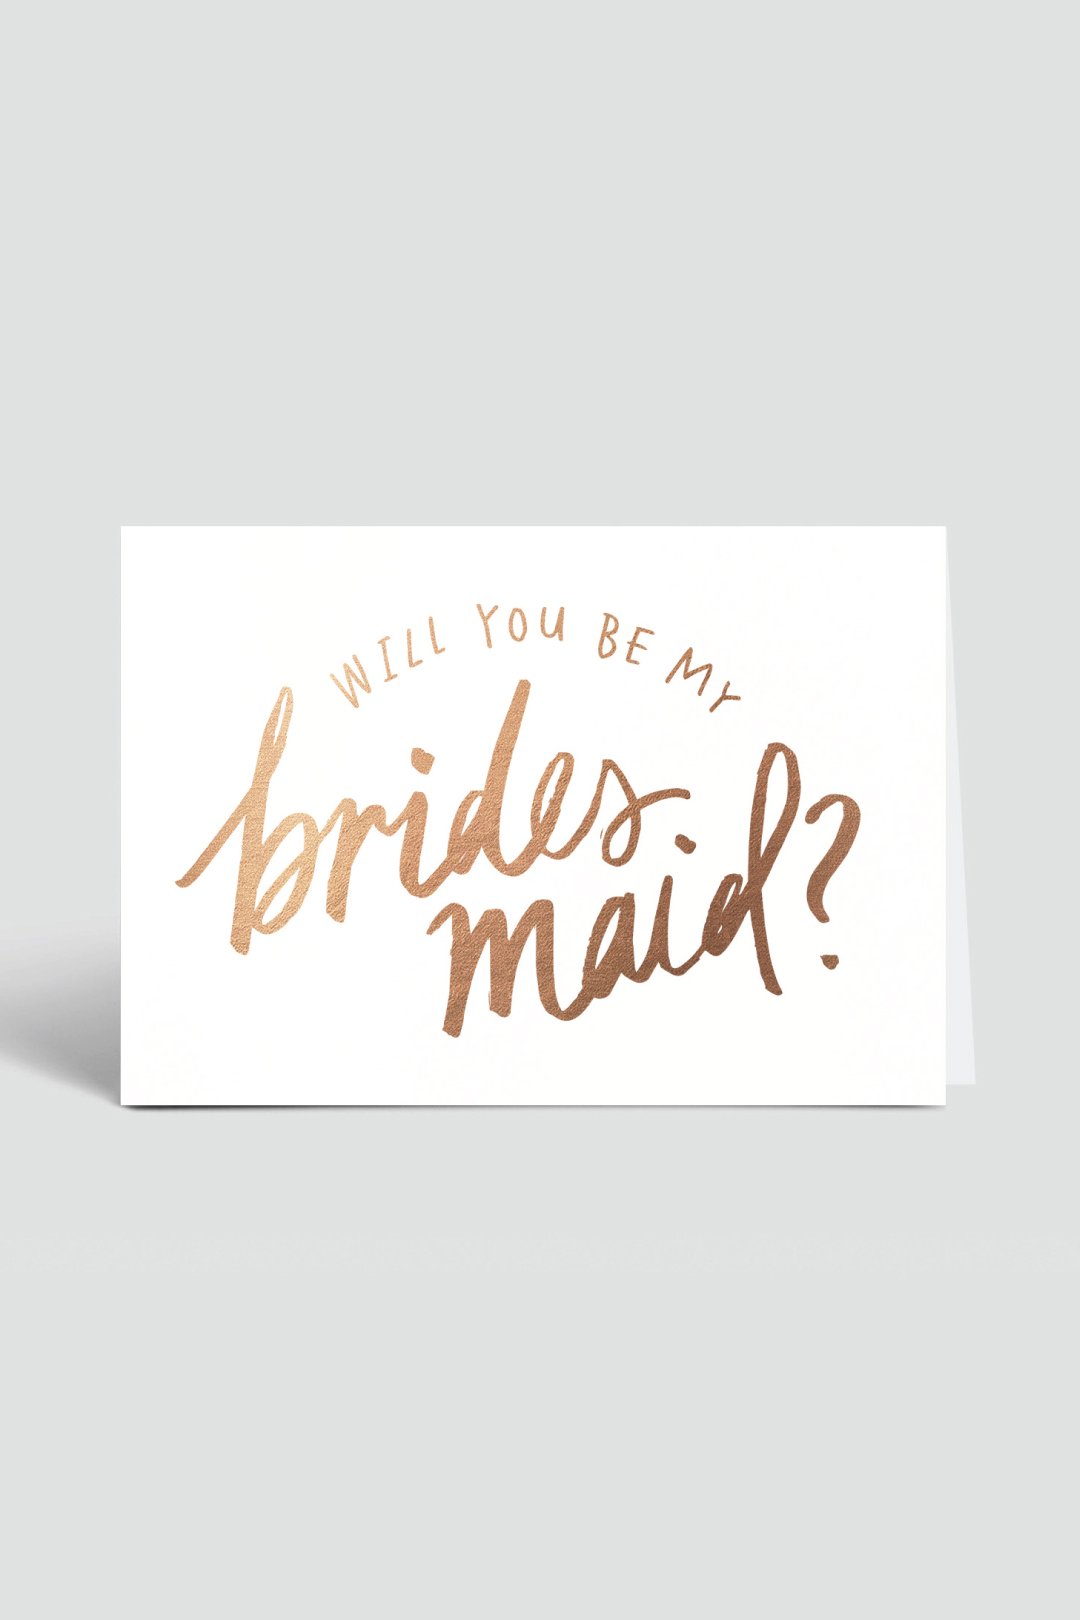 Proposal Gift Cards